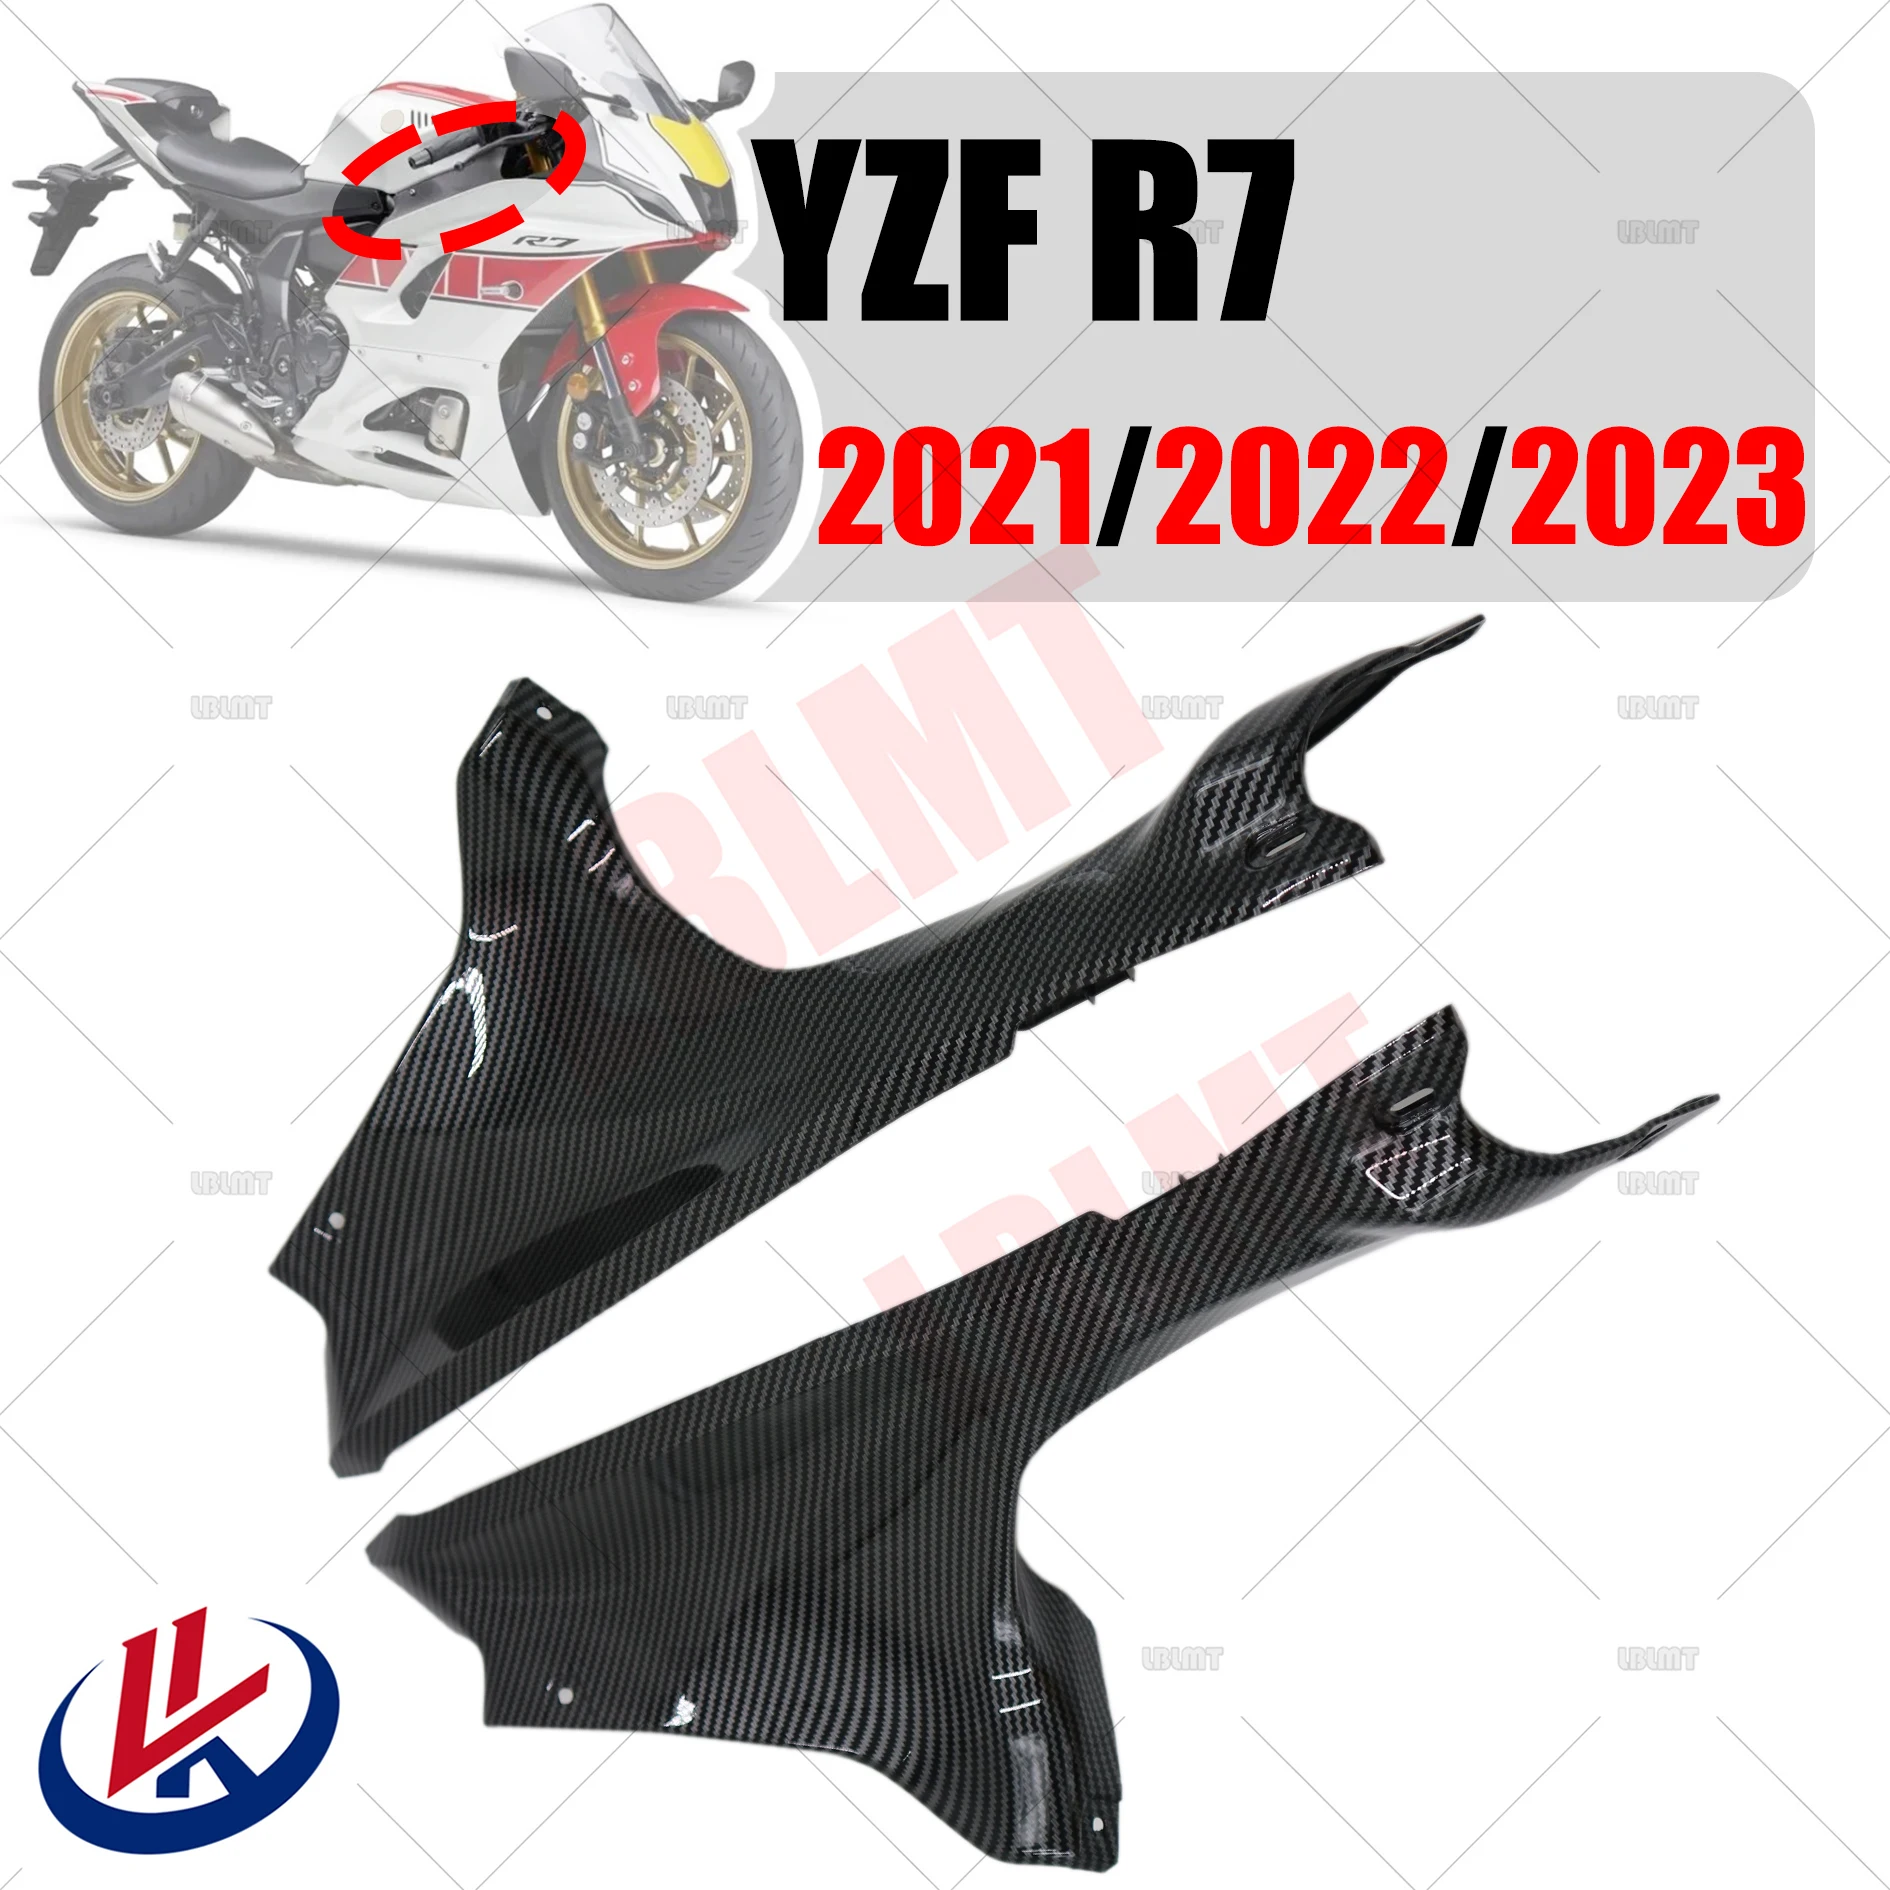 

For YAMAHA YZFR7 YZF R7 2021 2022 2023 YZF-R7 Carbon fiber spraying Motorcycle Upper Front Dash Air Cover Fairing